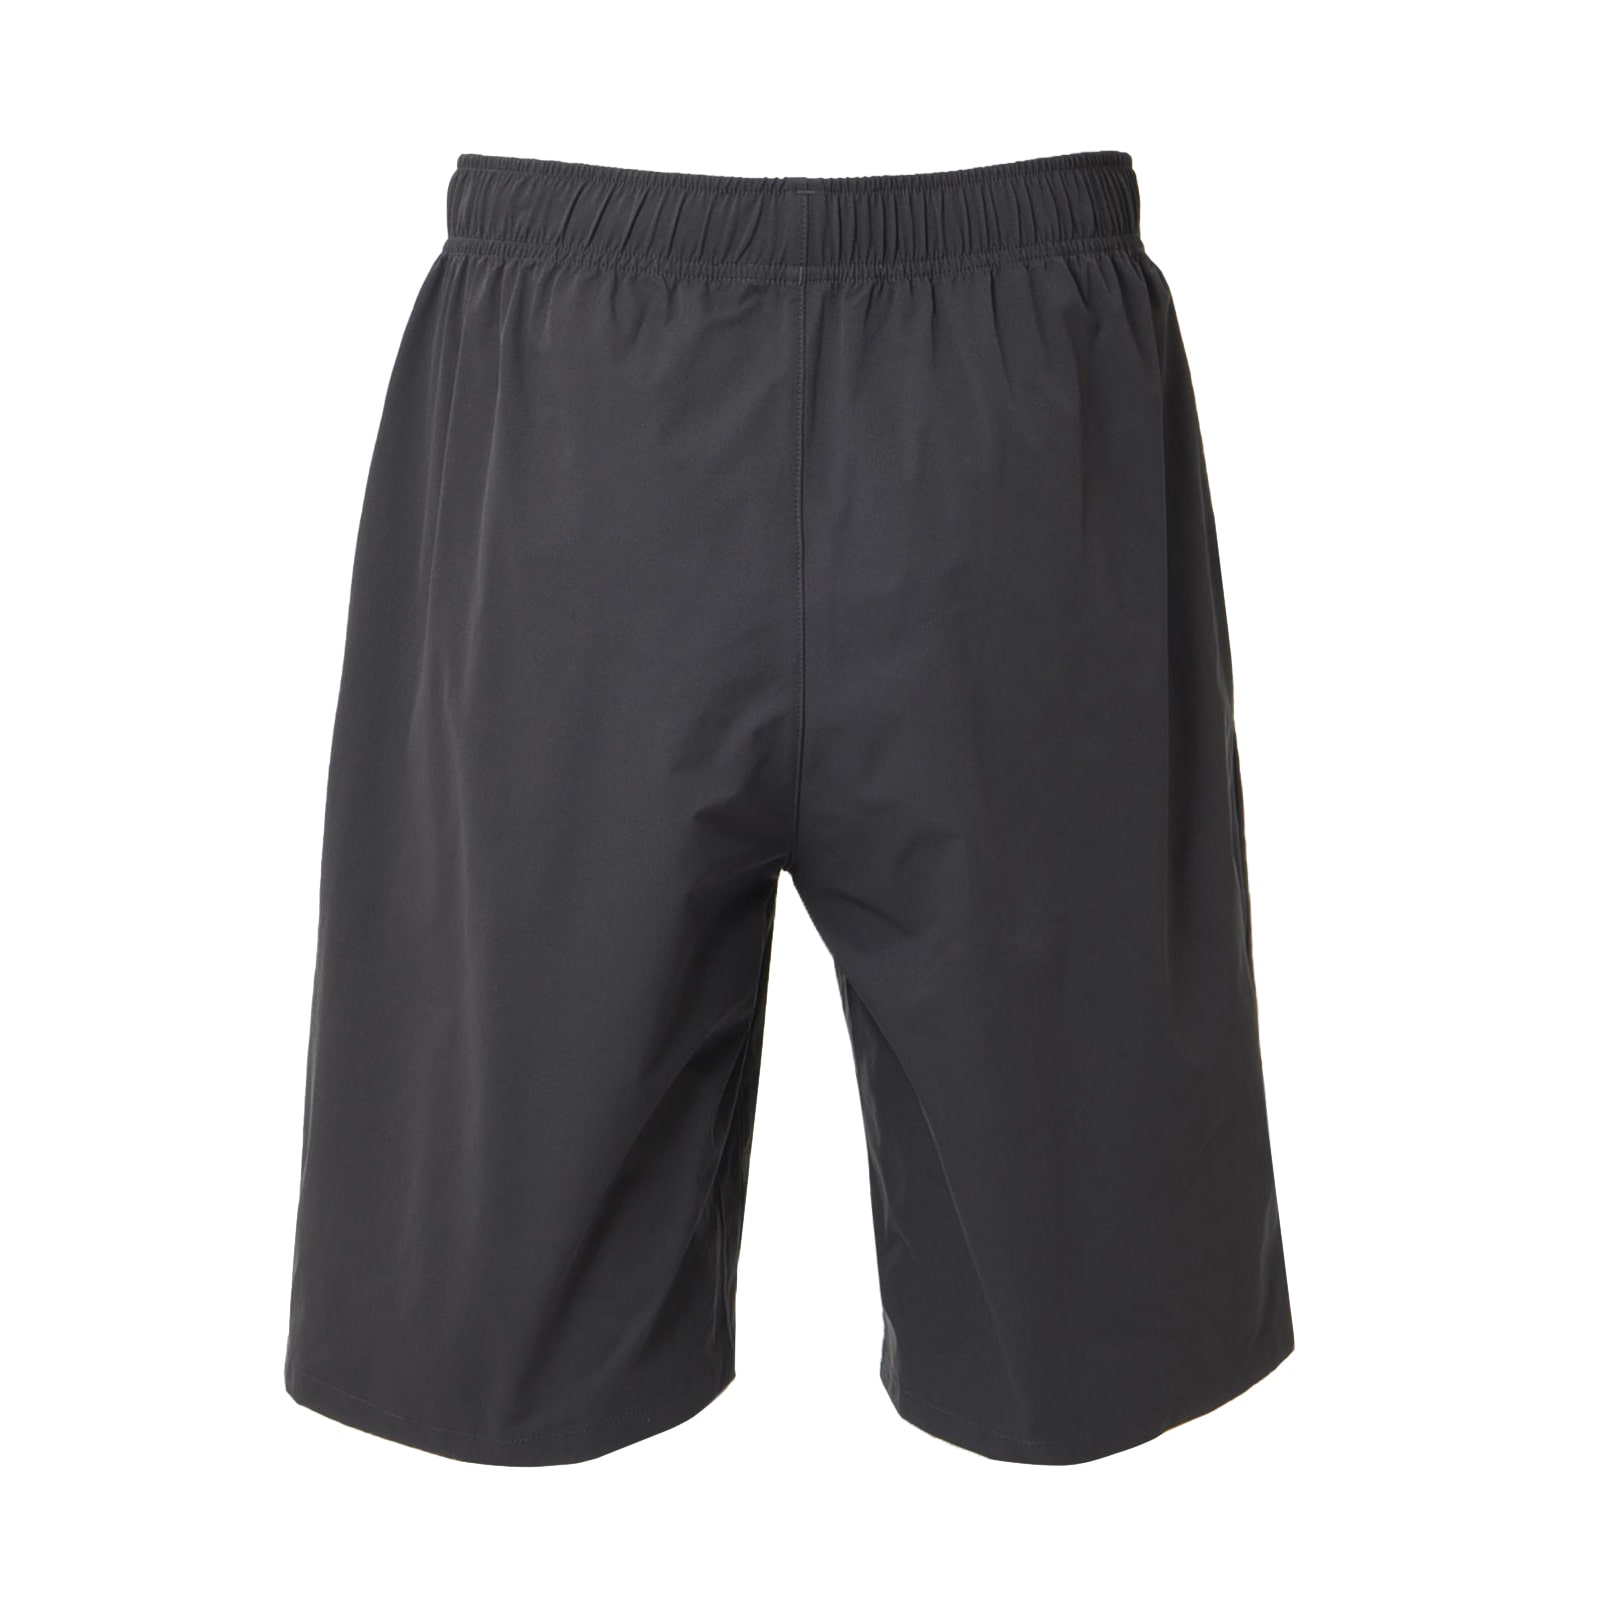 Black Out Collection Shorts Regular Length